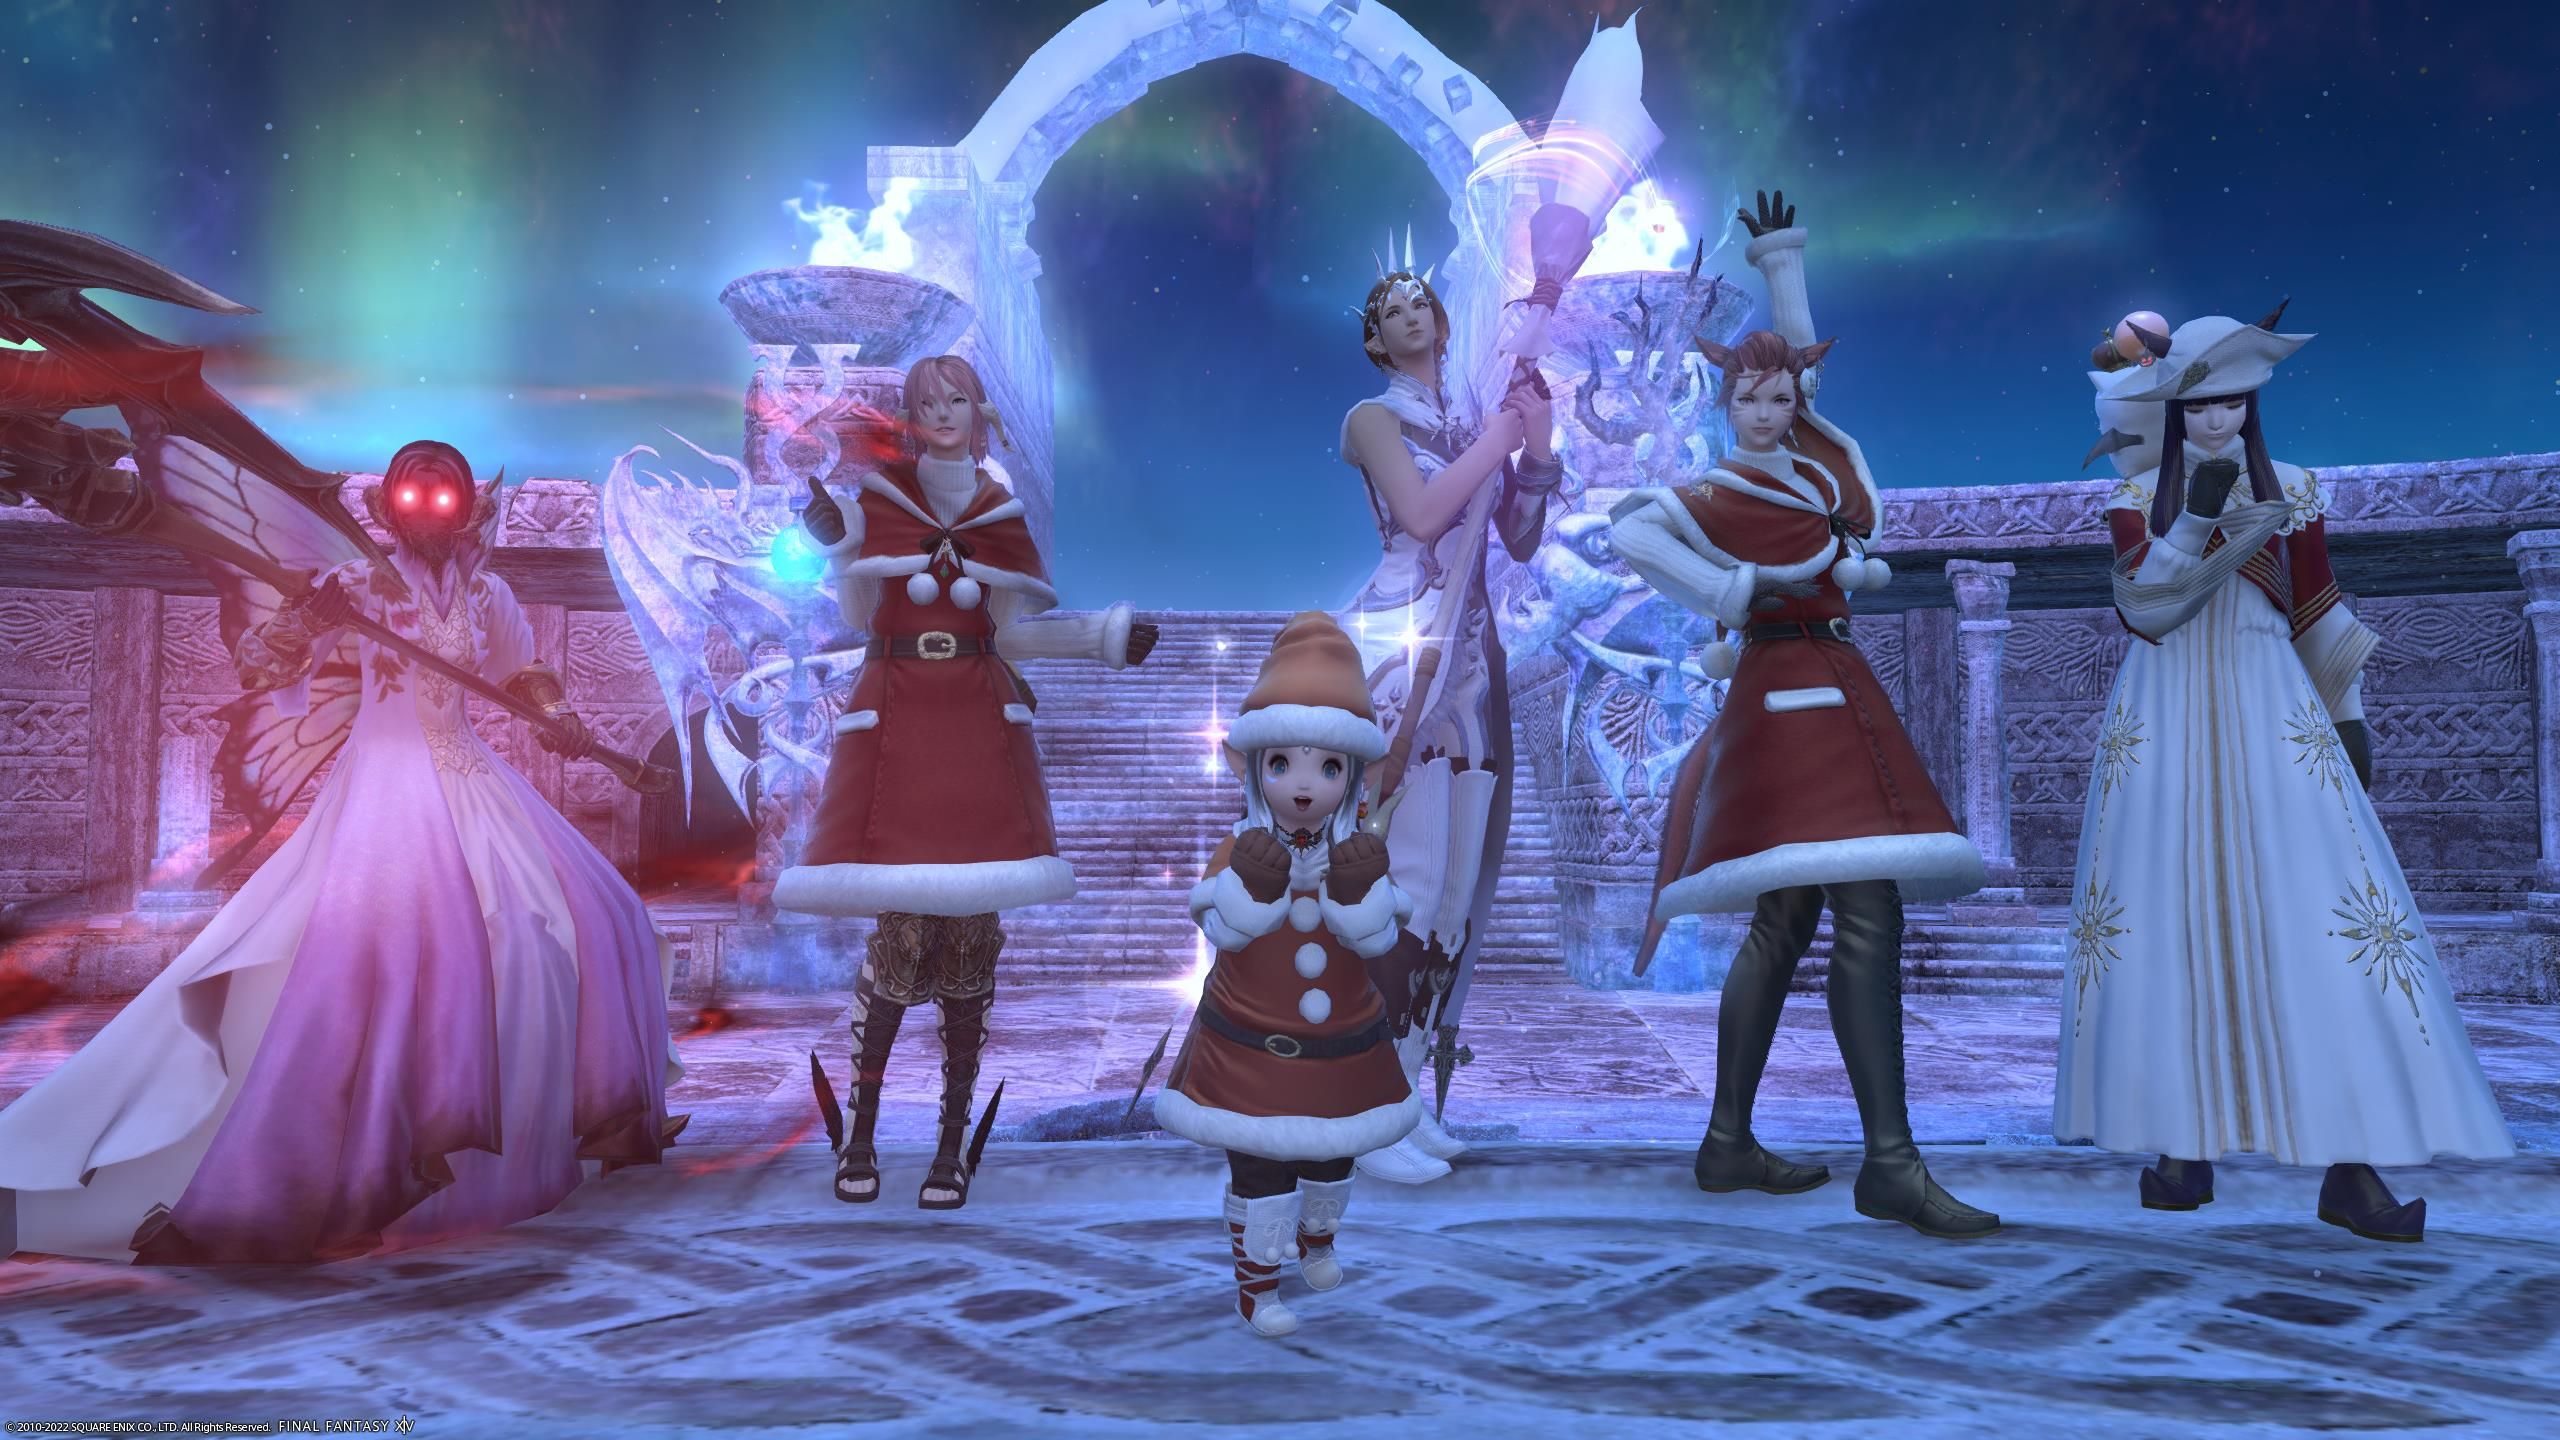 Team Bread in festive Starlight outfits